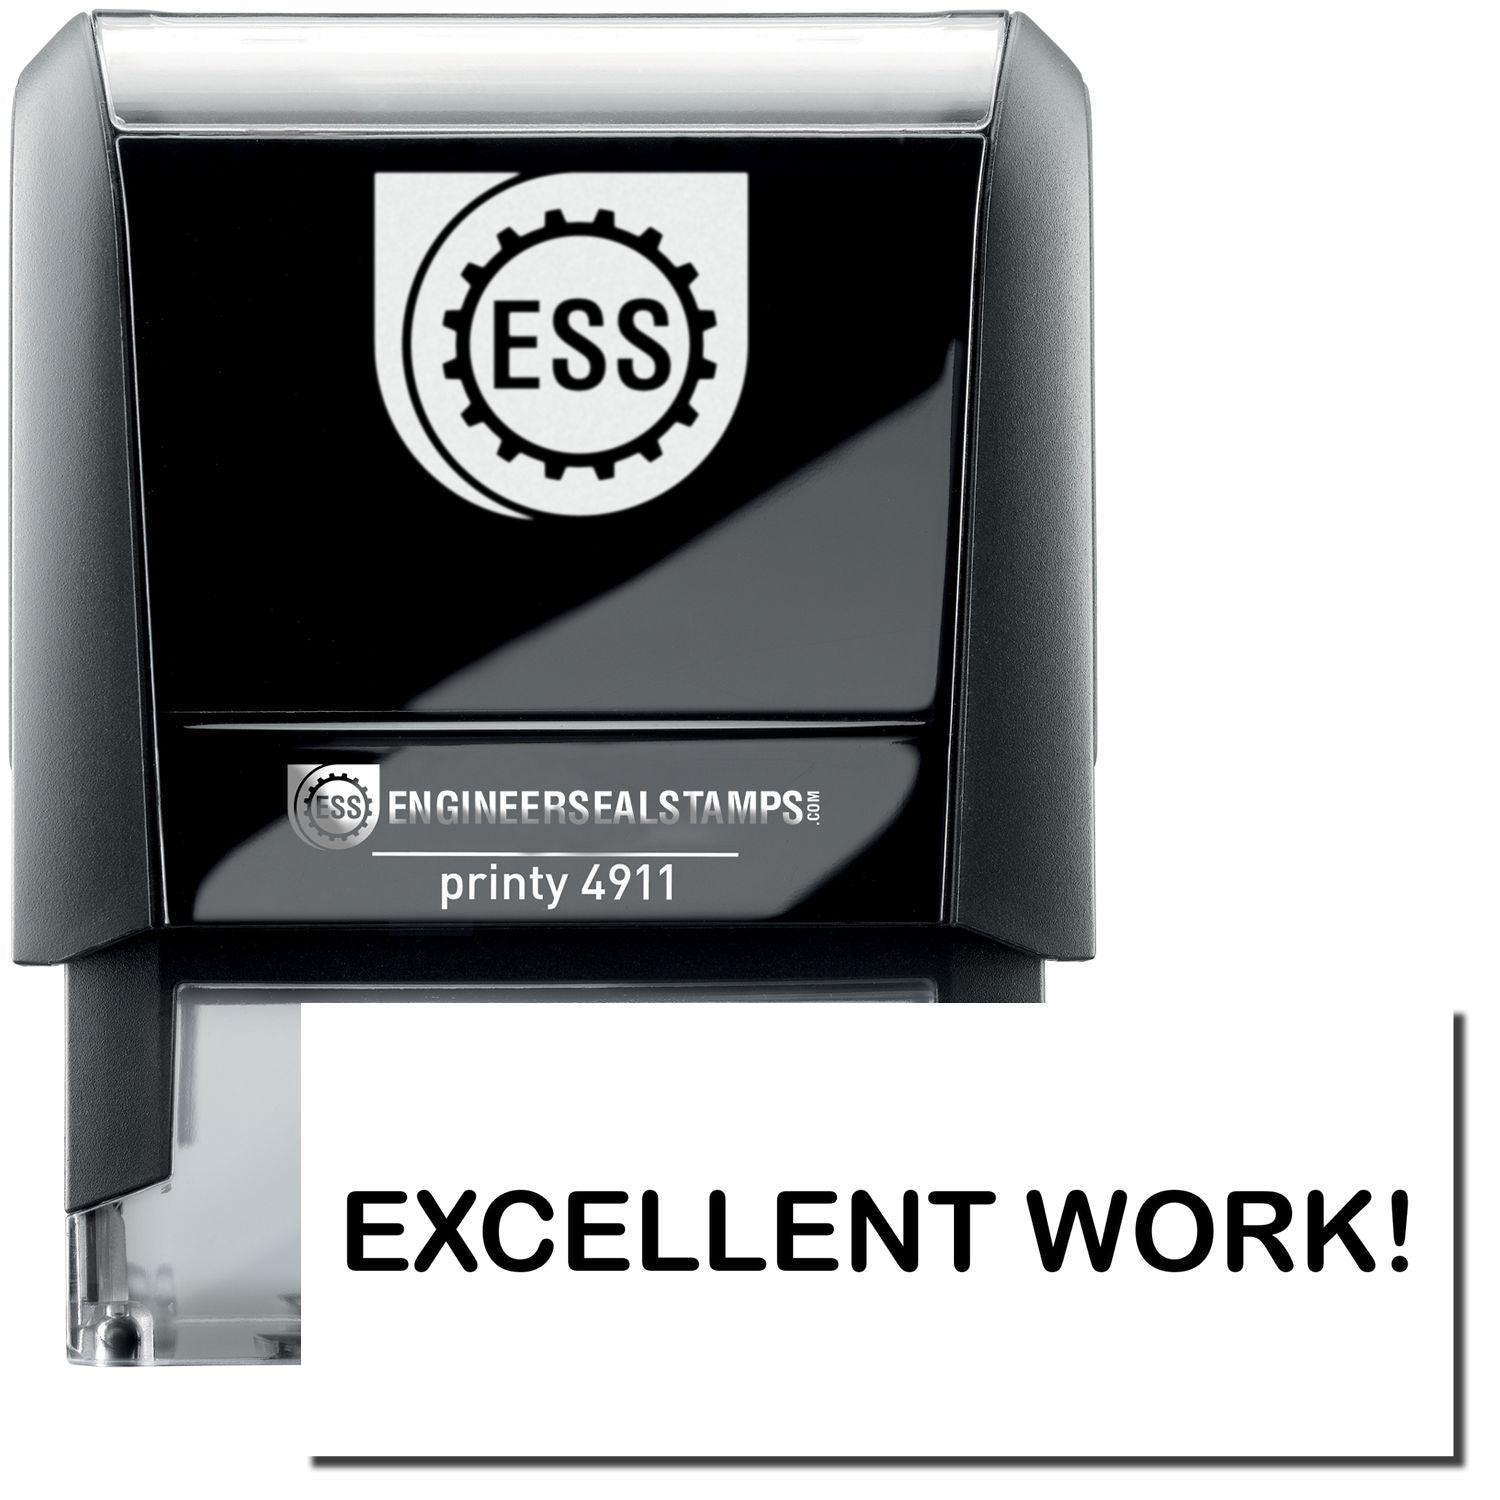 A self-inking stamp with a stamped image showing how the text "EXCELLENT WORK!" is displayed after stamping.